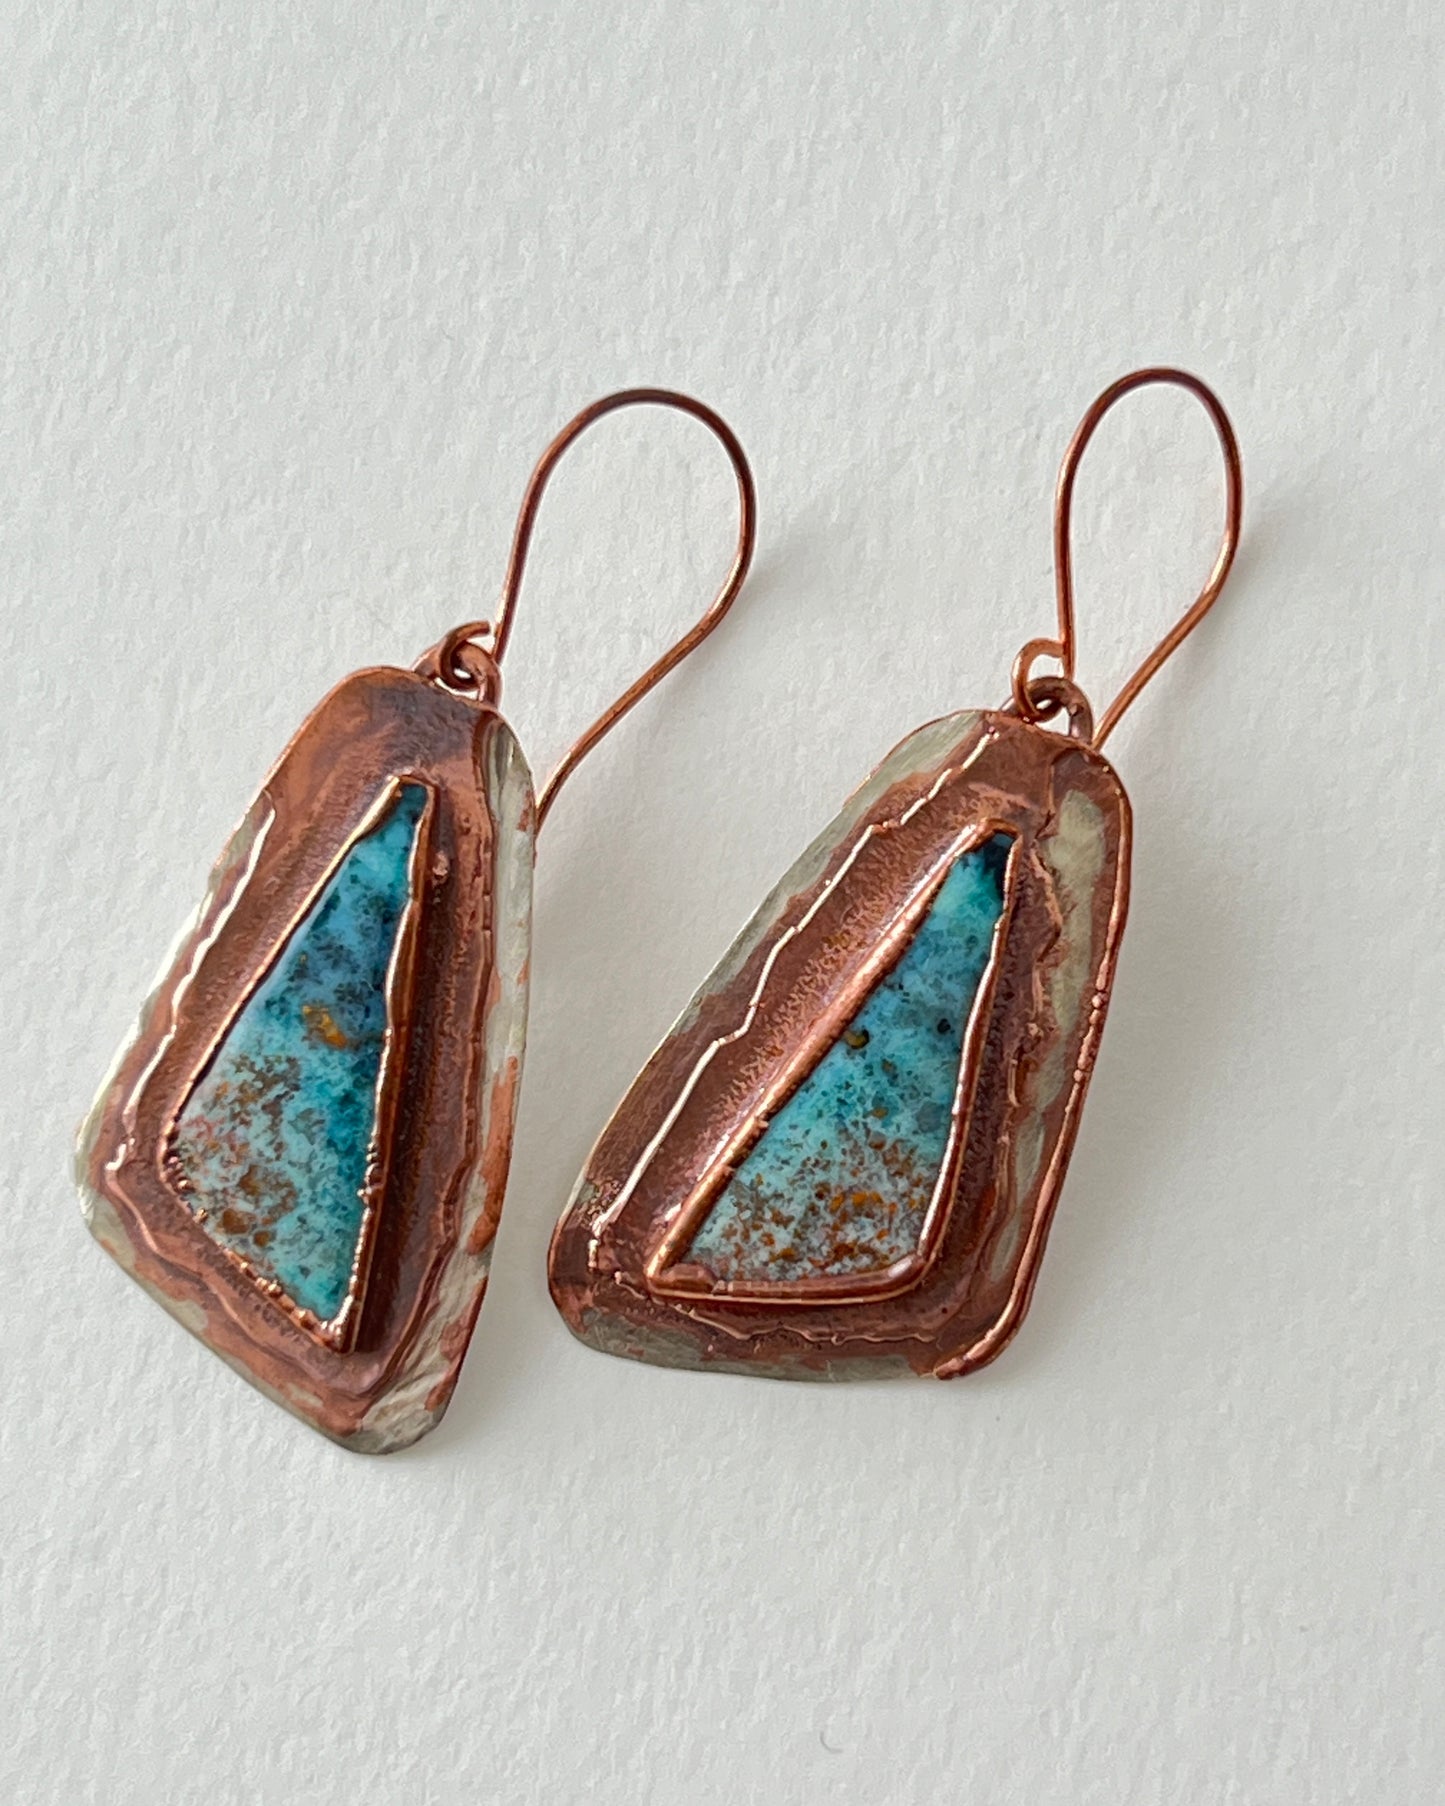 Signature Wood Opal Earrings in Silver and Copper